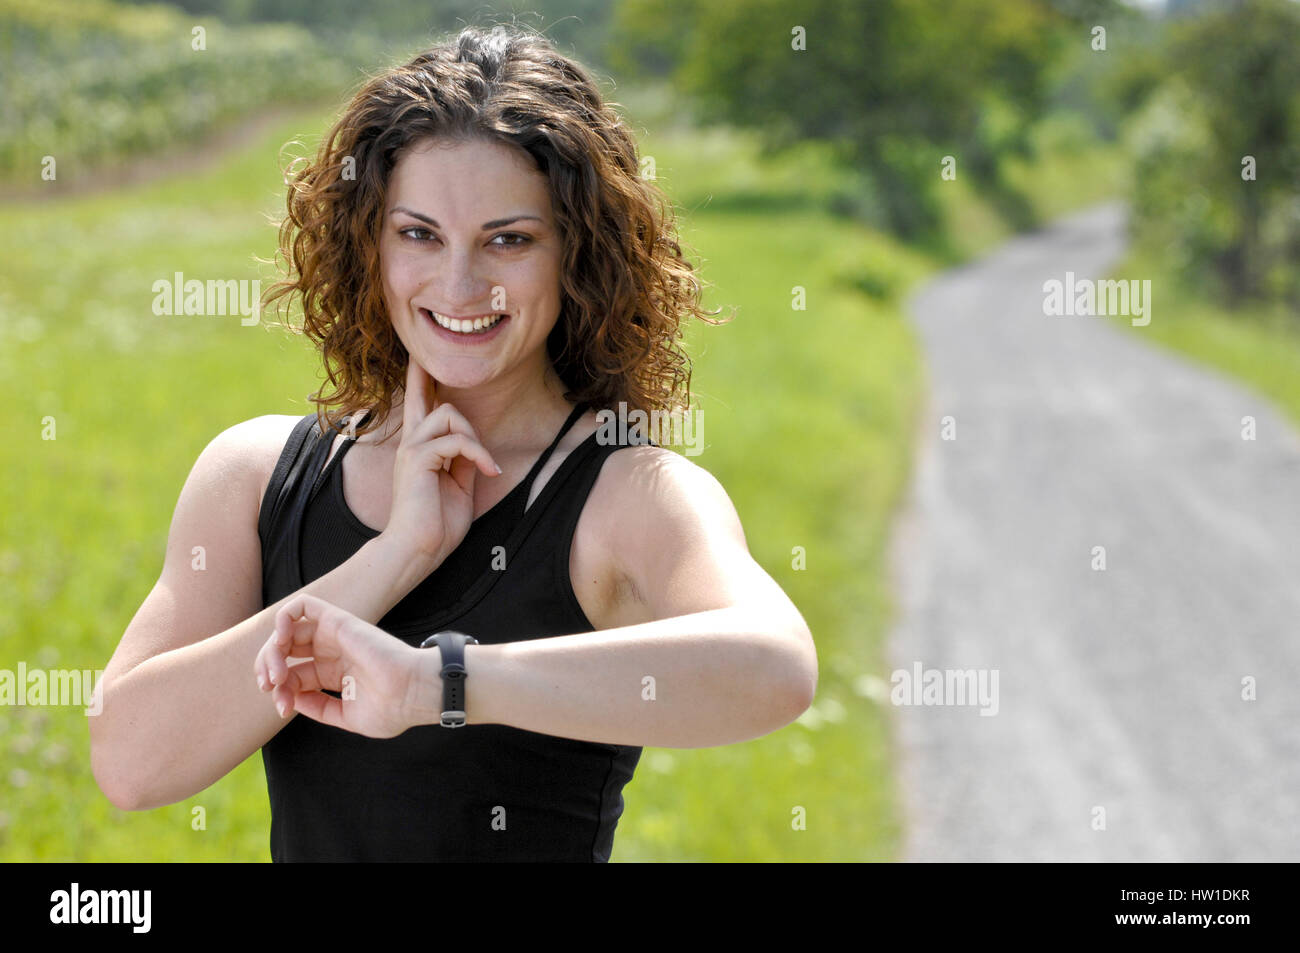 Woman with pulse clock, Frau mit Pulsuhr Stock Photo